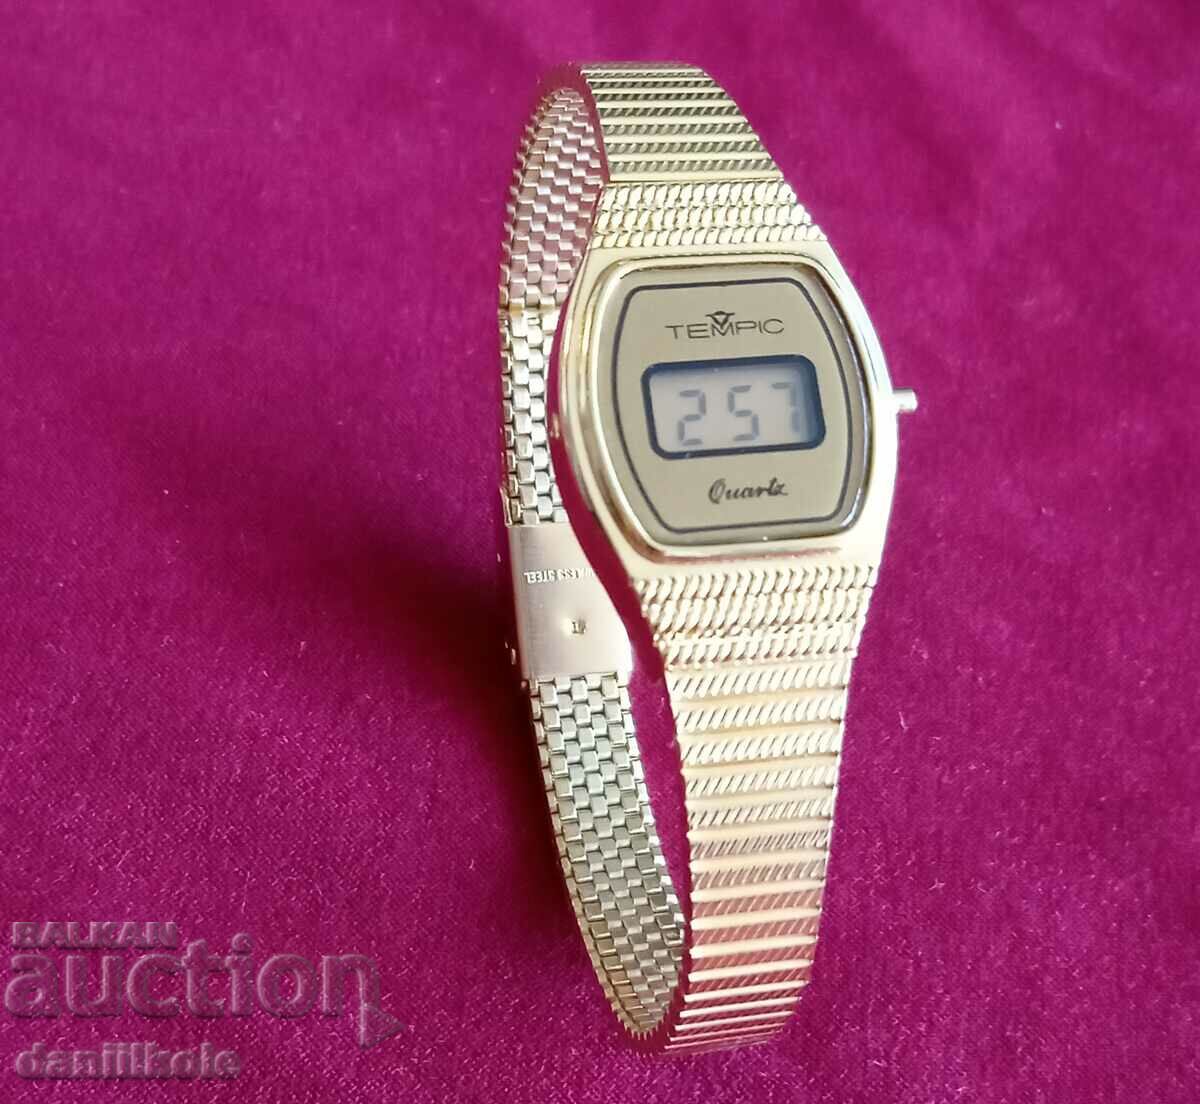 *$*Y*$* WOMEN'S TEMPIC ELECTRONIC WATCH - LIKE NEW *$*Y*$*